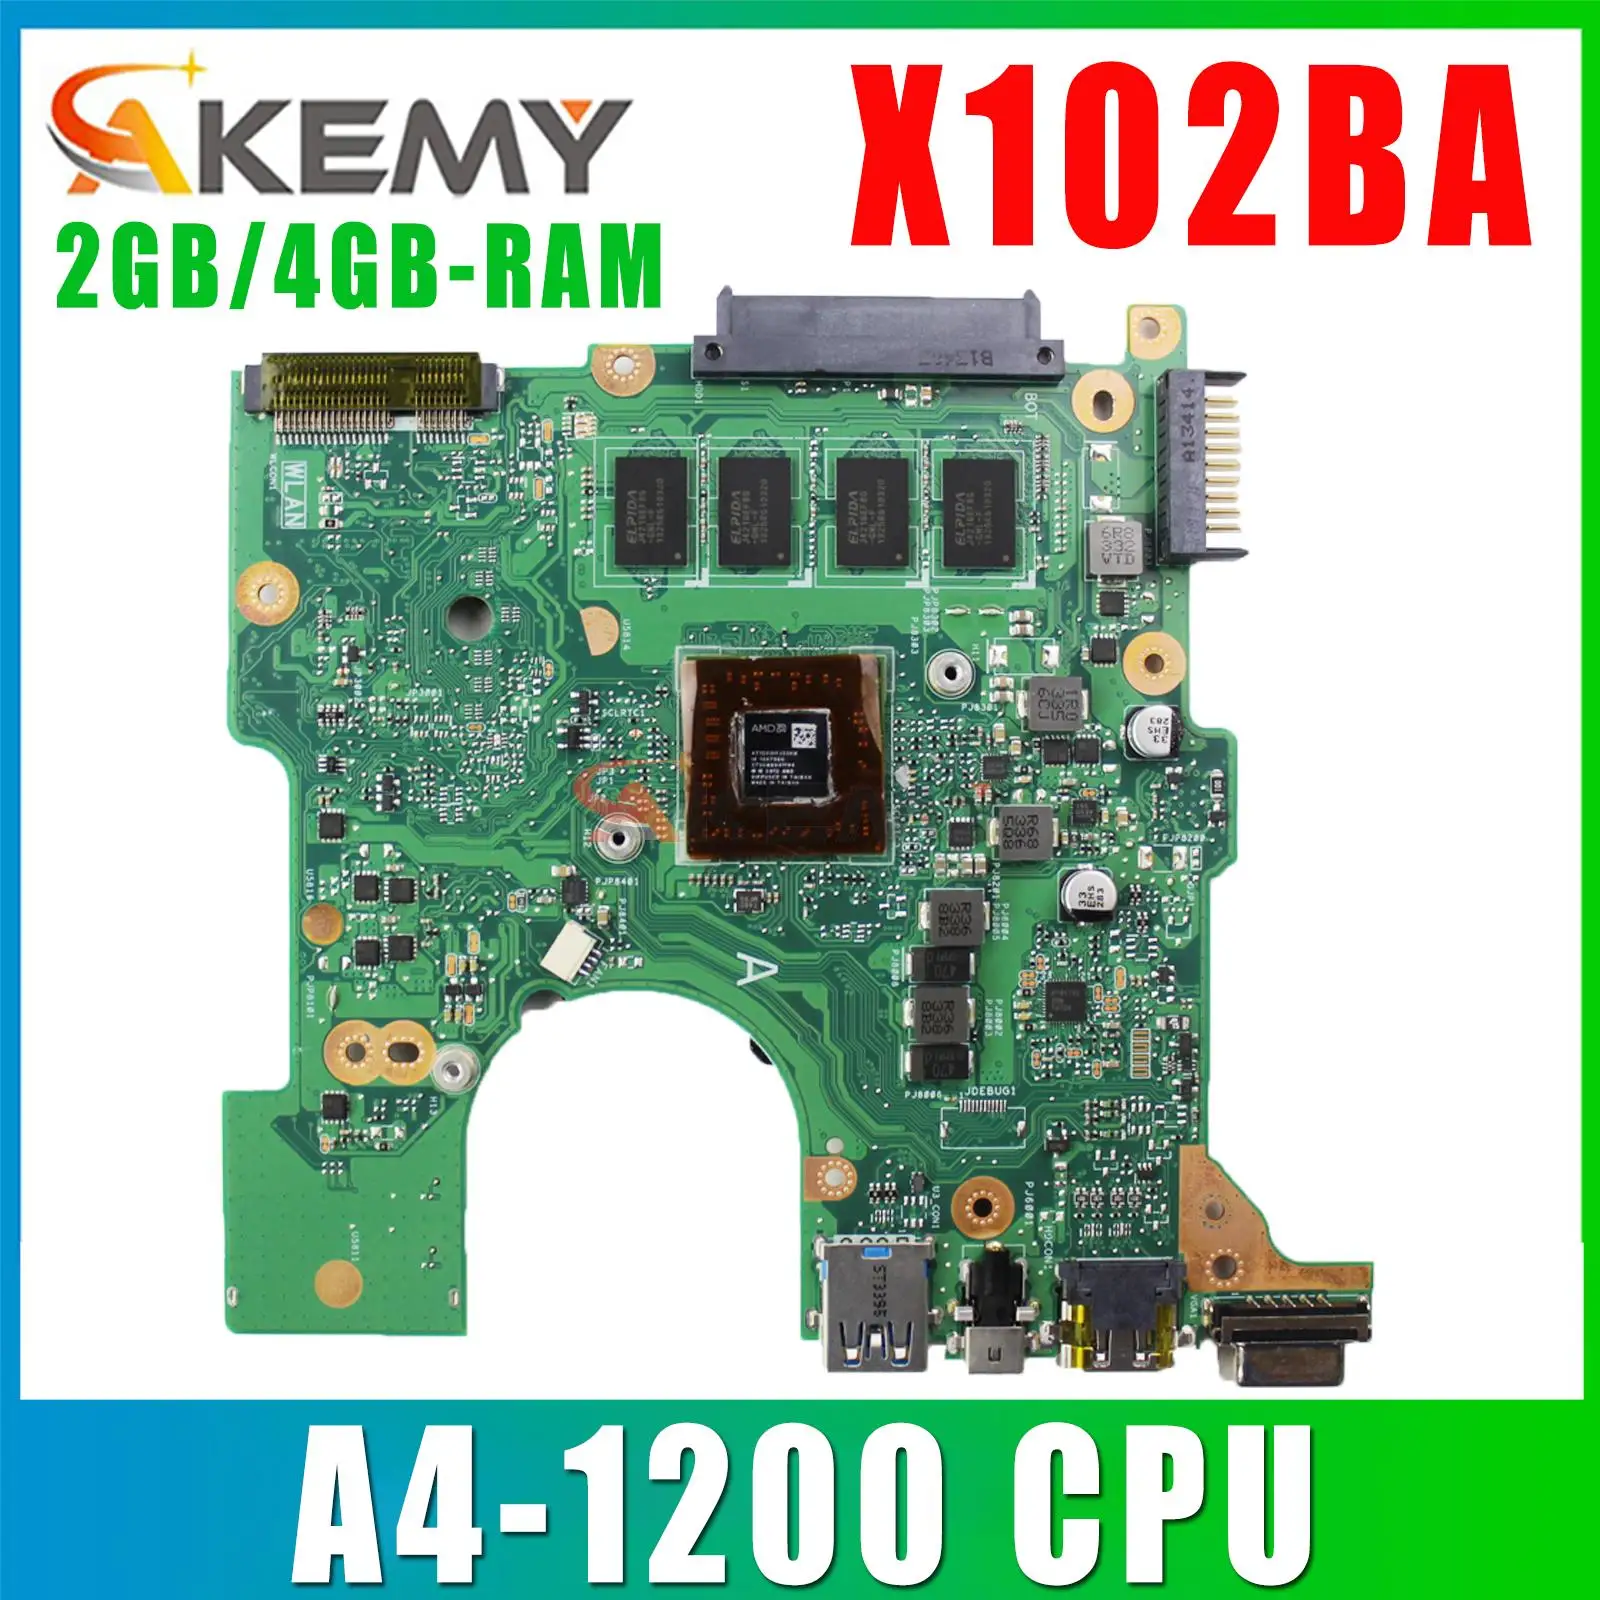 

X102BA Mainboard For ASUS F102B F102BA X102B Laptop Motherboard With A4-1200 2GB/4GB-RAM Maintherboard Test OK